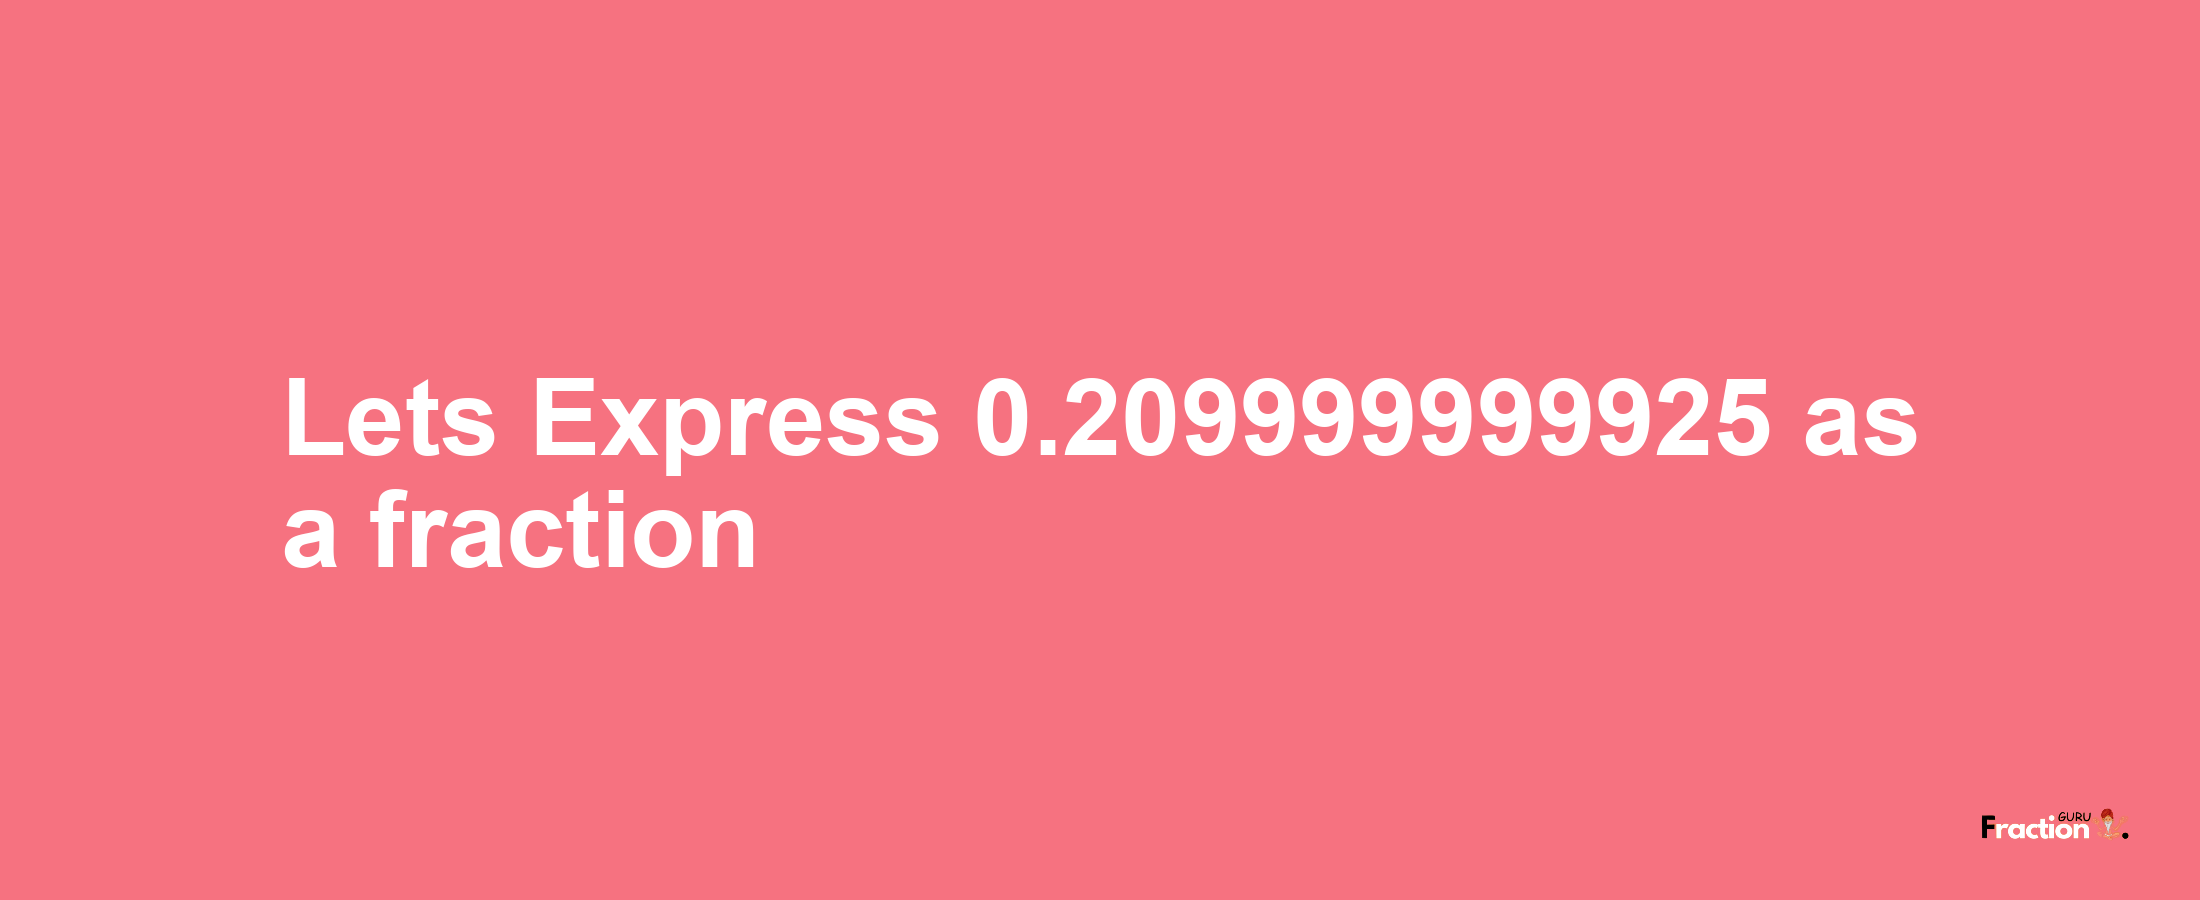 Lets Express 0.209999999925 as afraction